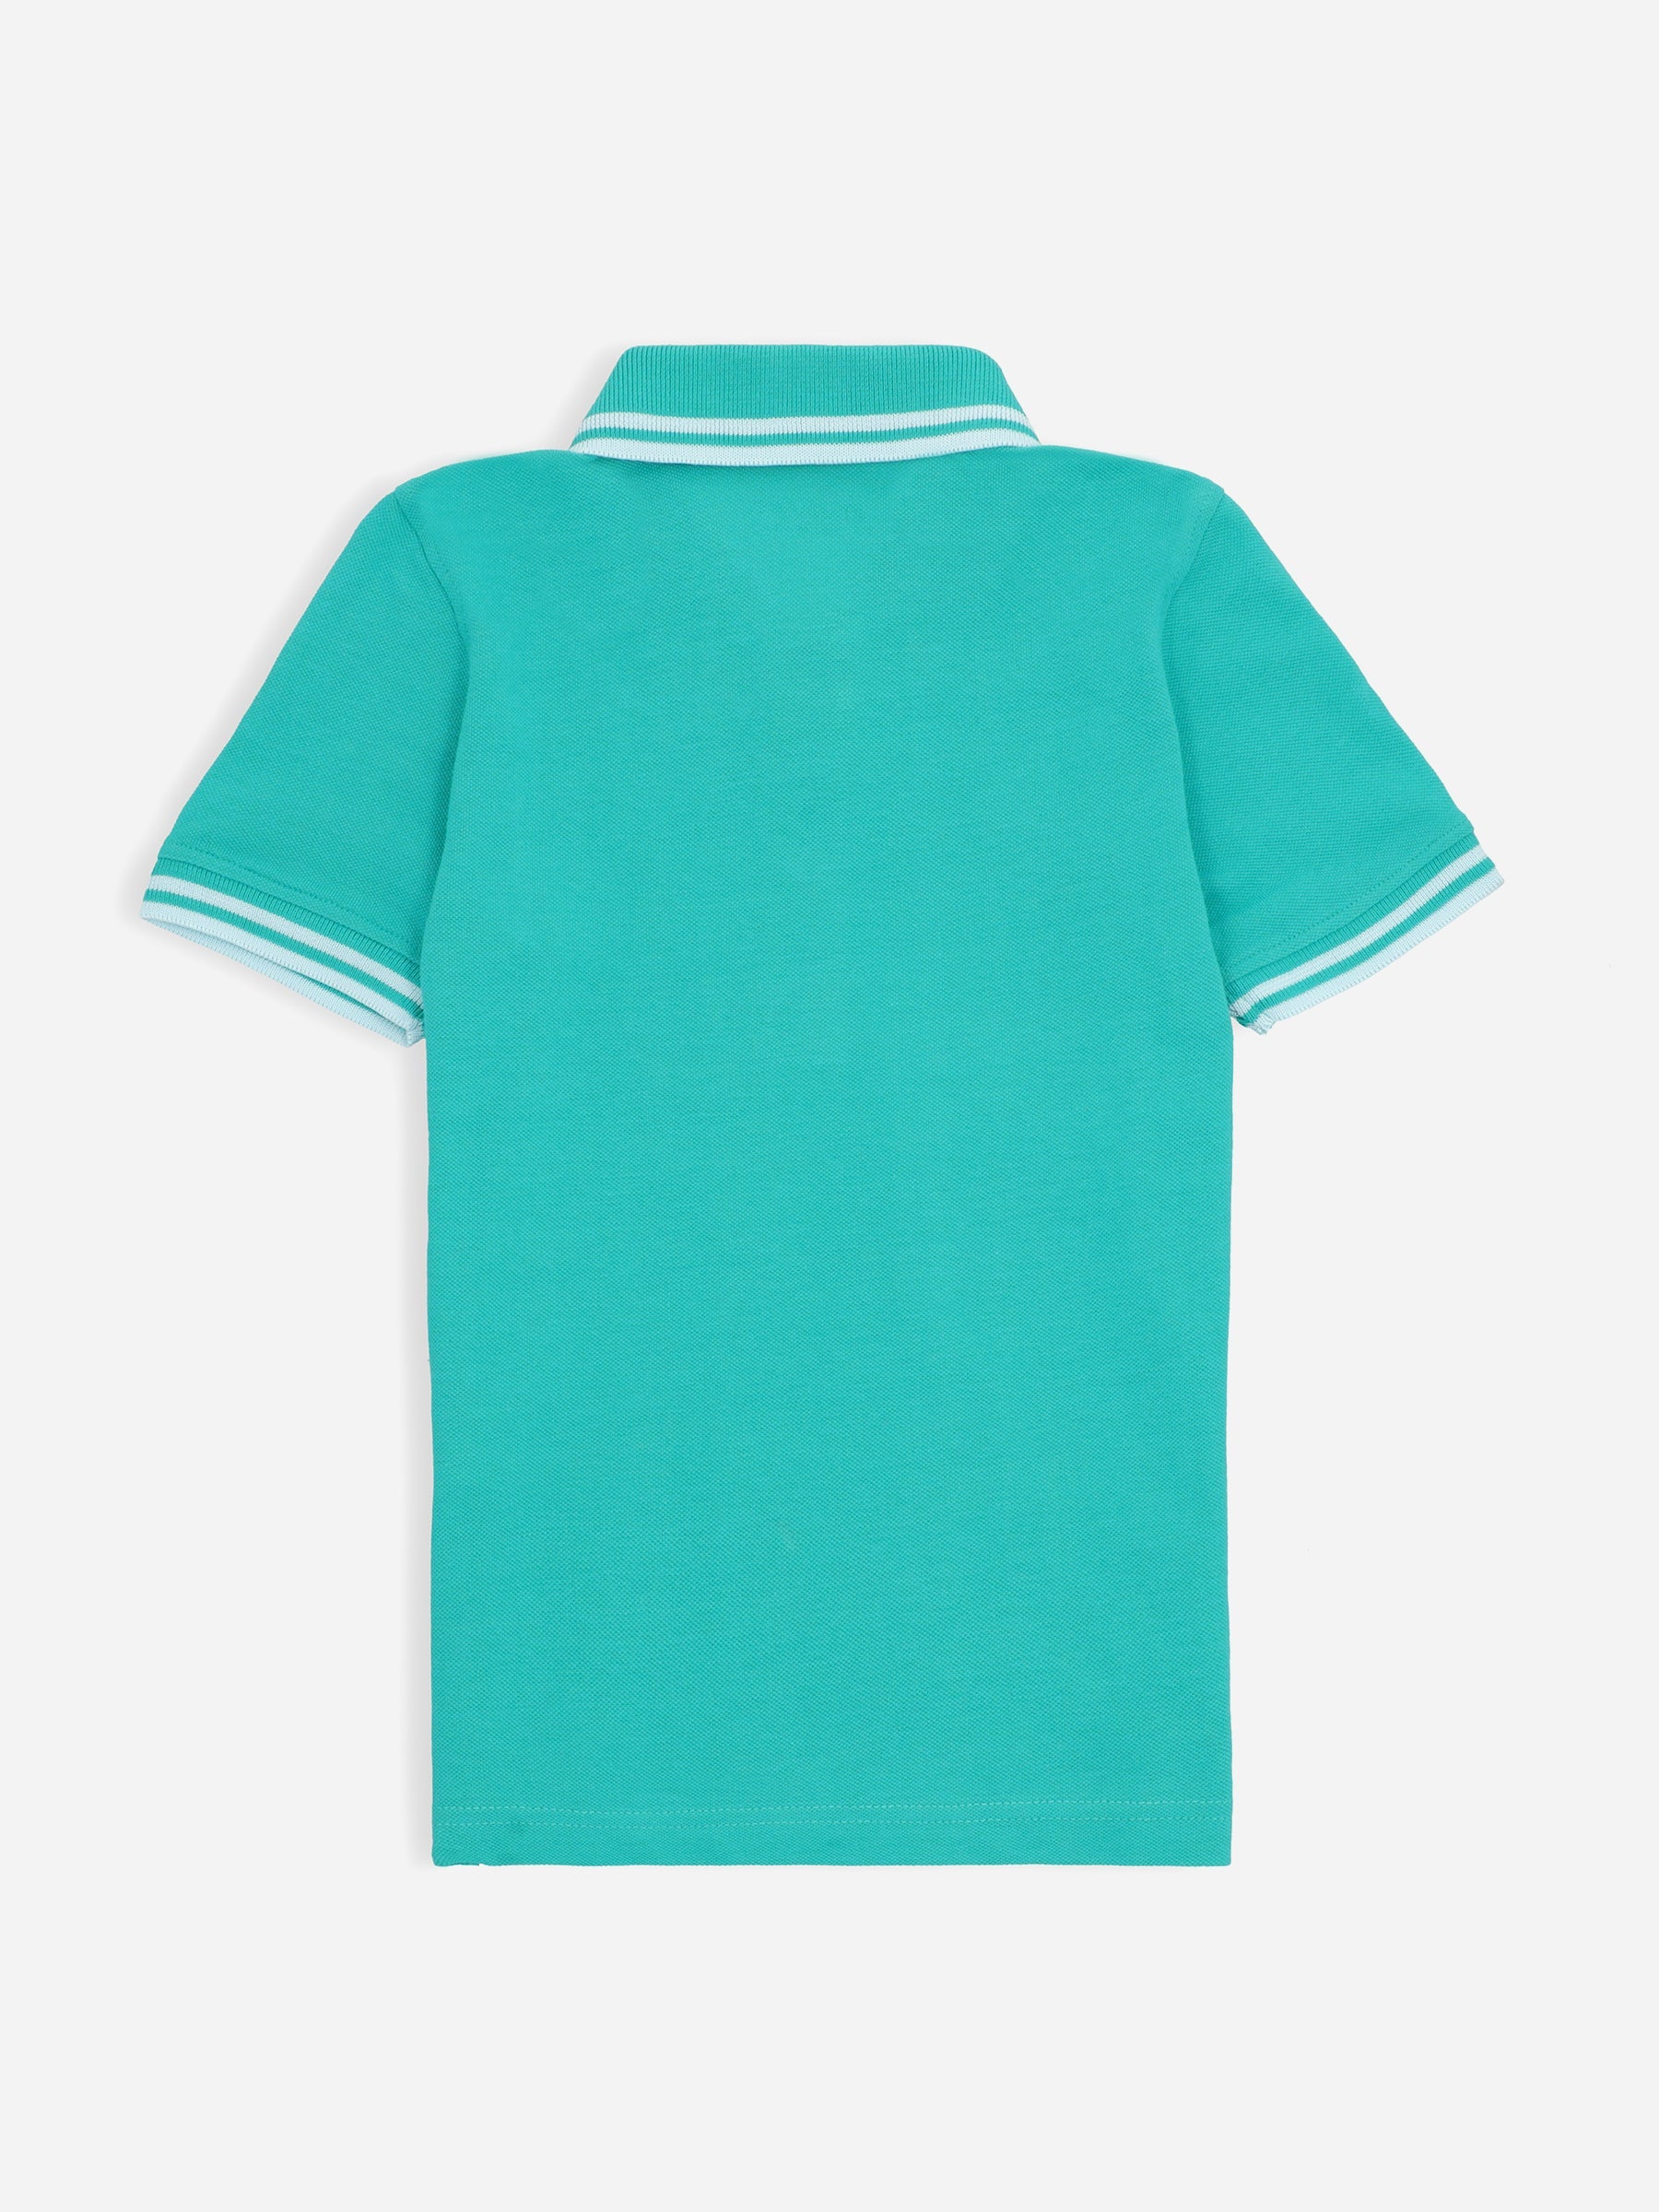 Turquoise Pique Casual Tipped polo Brumano Pakistan